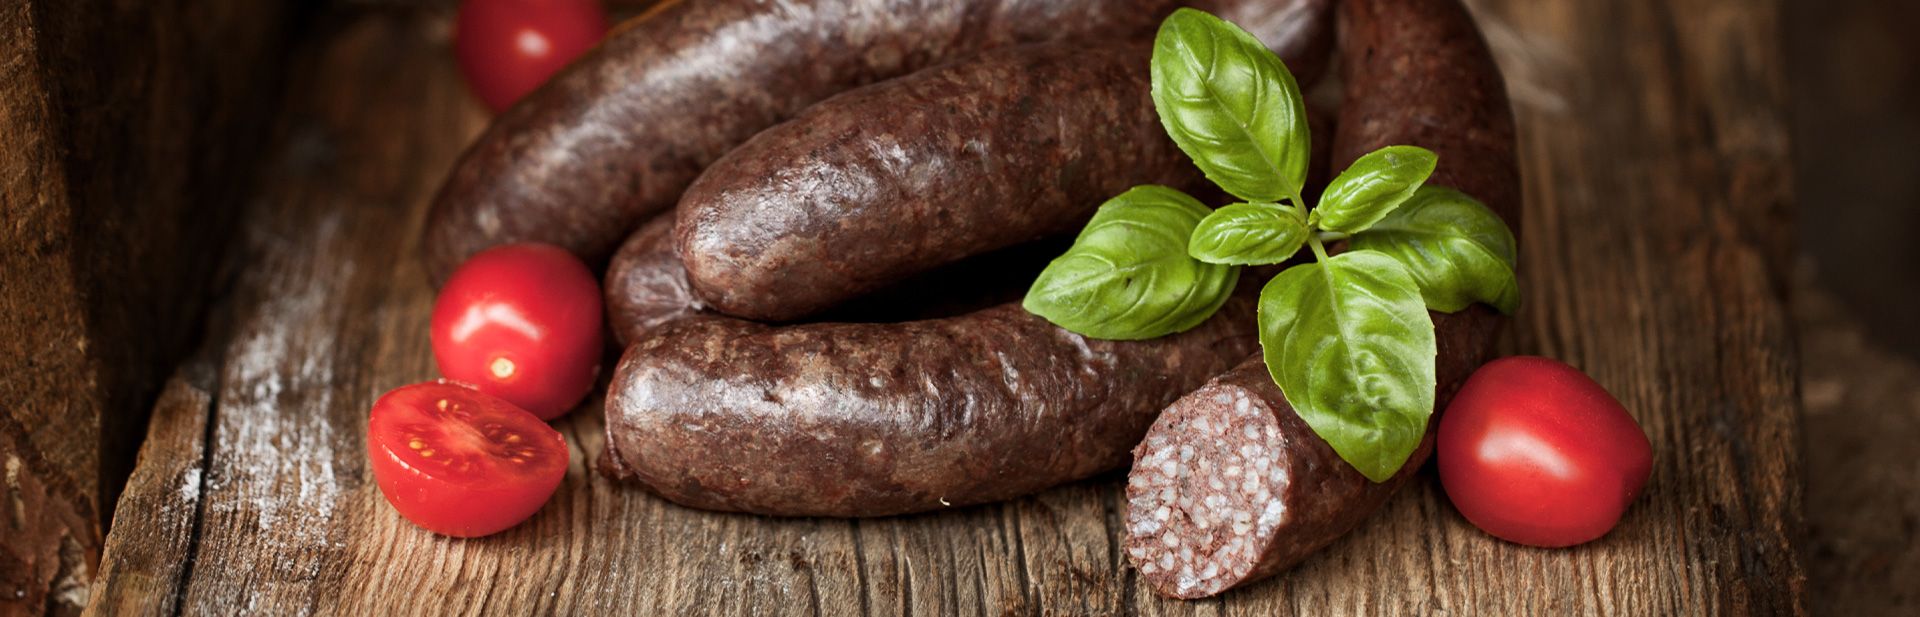 Cooked sausage & cured meat products